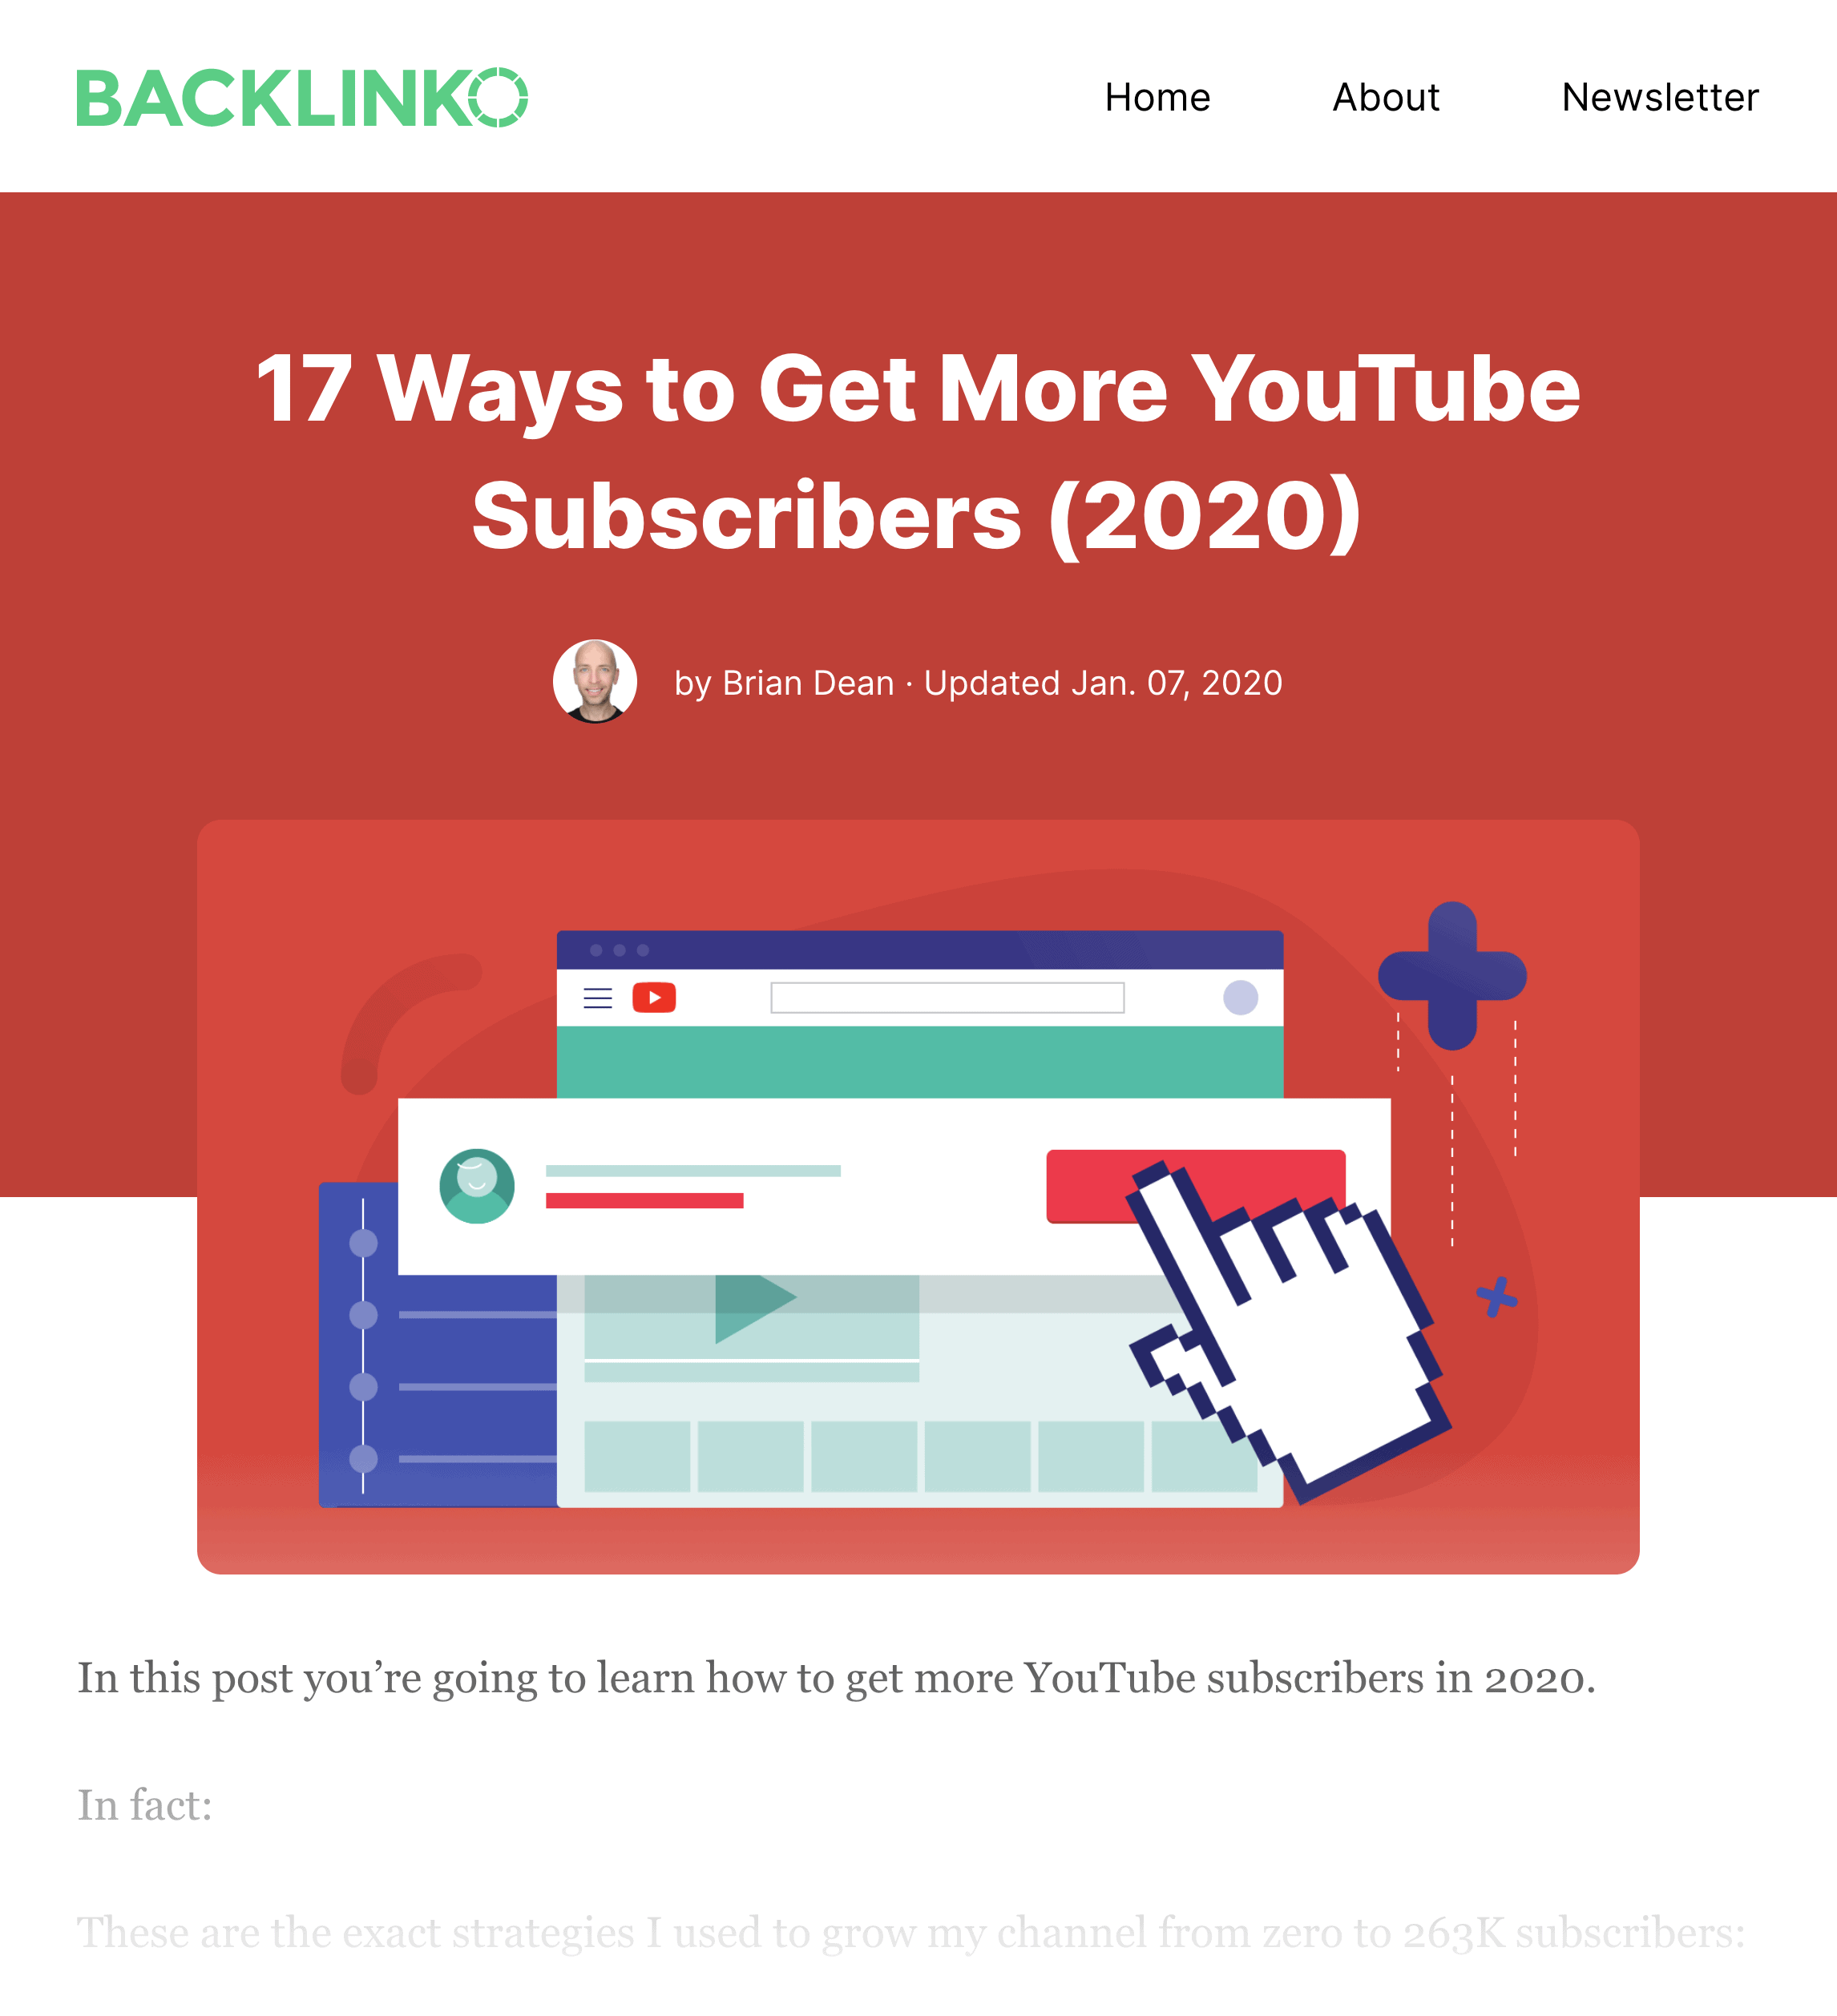 Backlinko – How to get more YouTube subscribers post